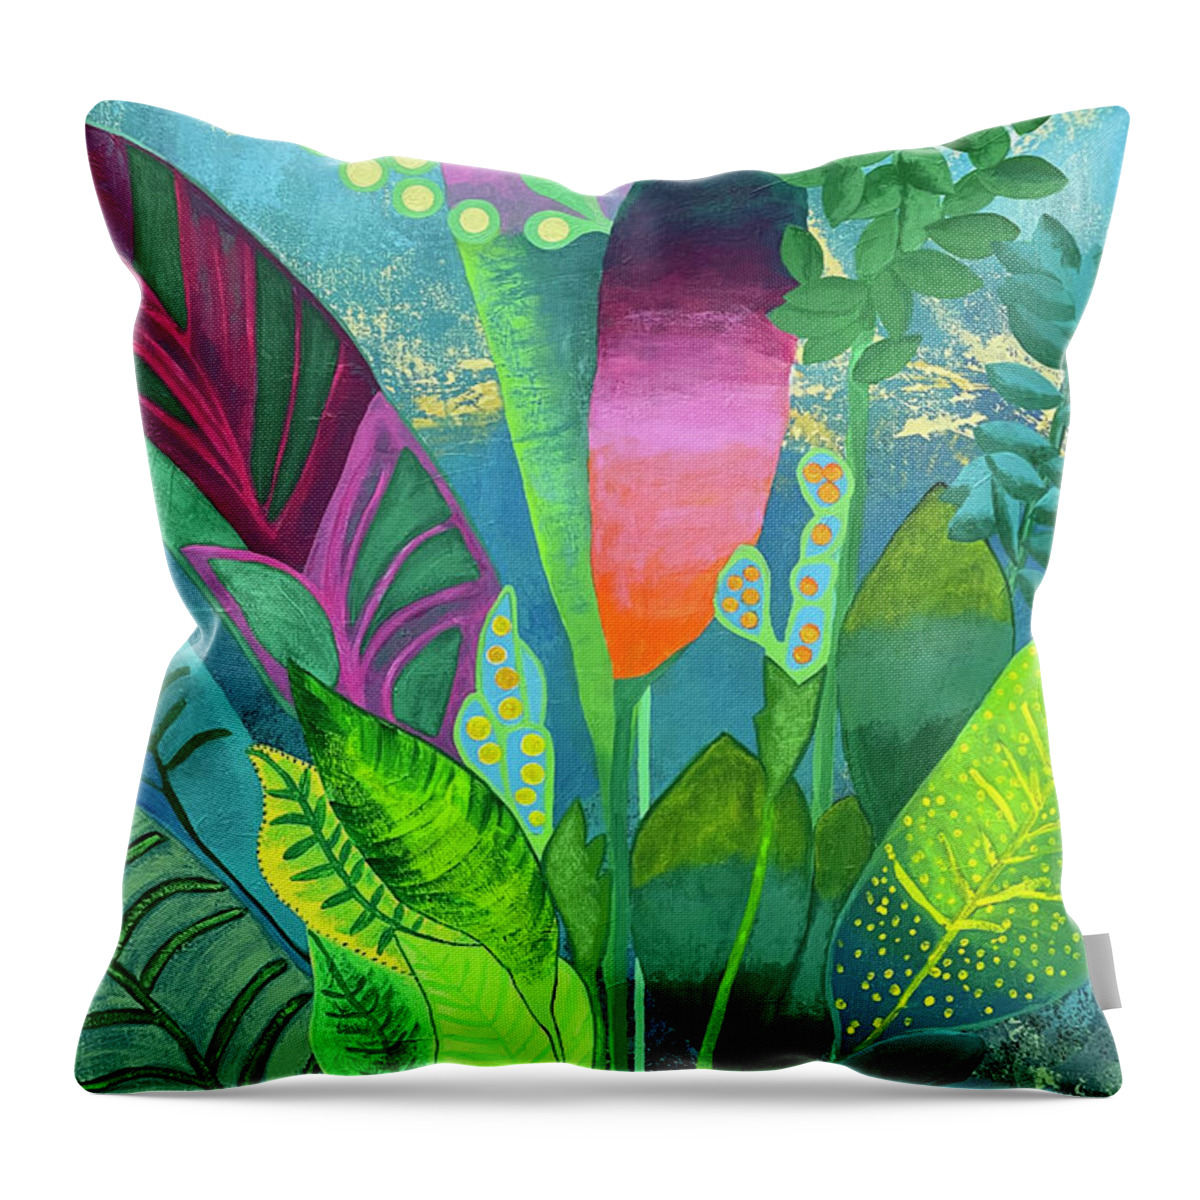 Tropical Throw Pillow featuring the painting Island Dreamscape by Linda Bailey